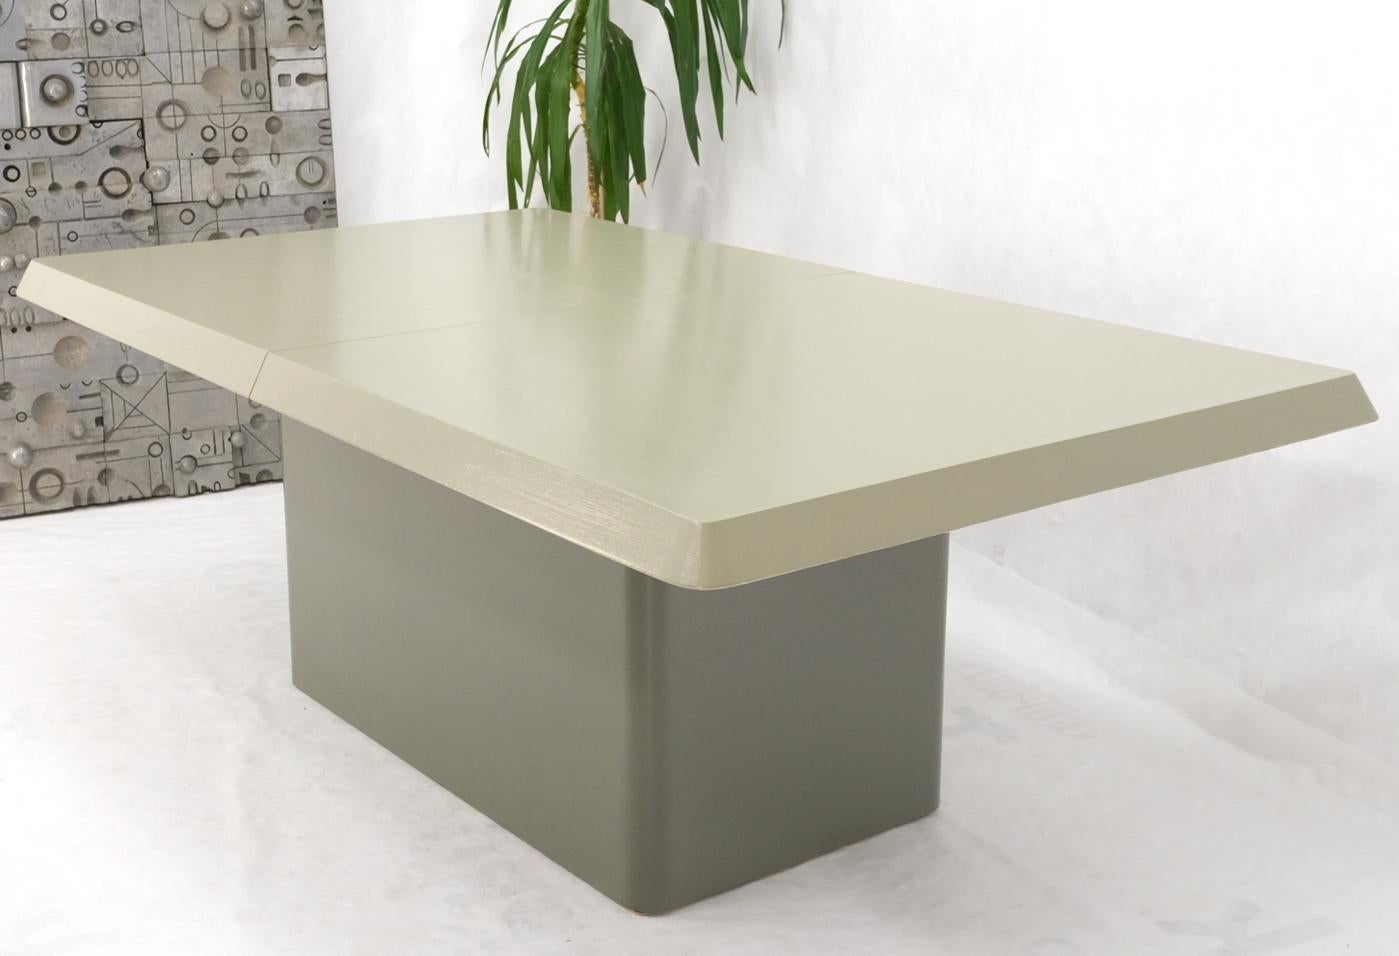 American Oversize Pedestal Base Cloth Wrapped Dining Conference Table For Sale